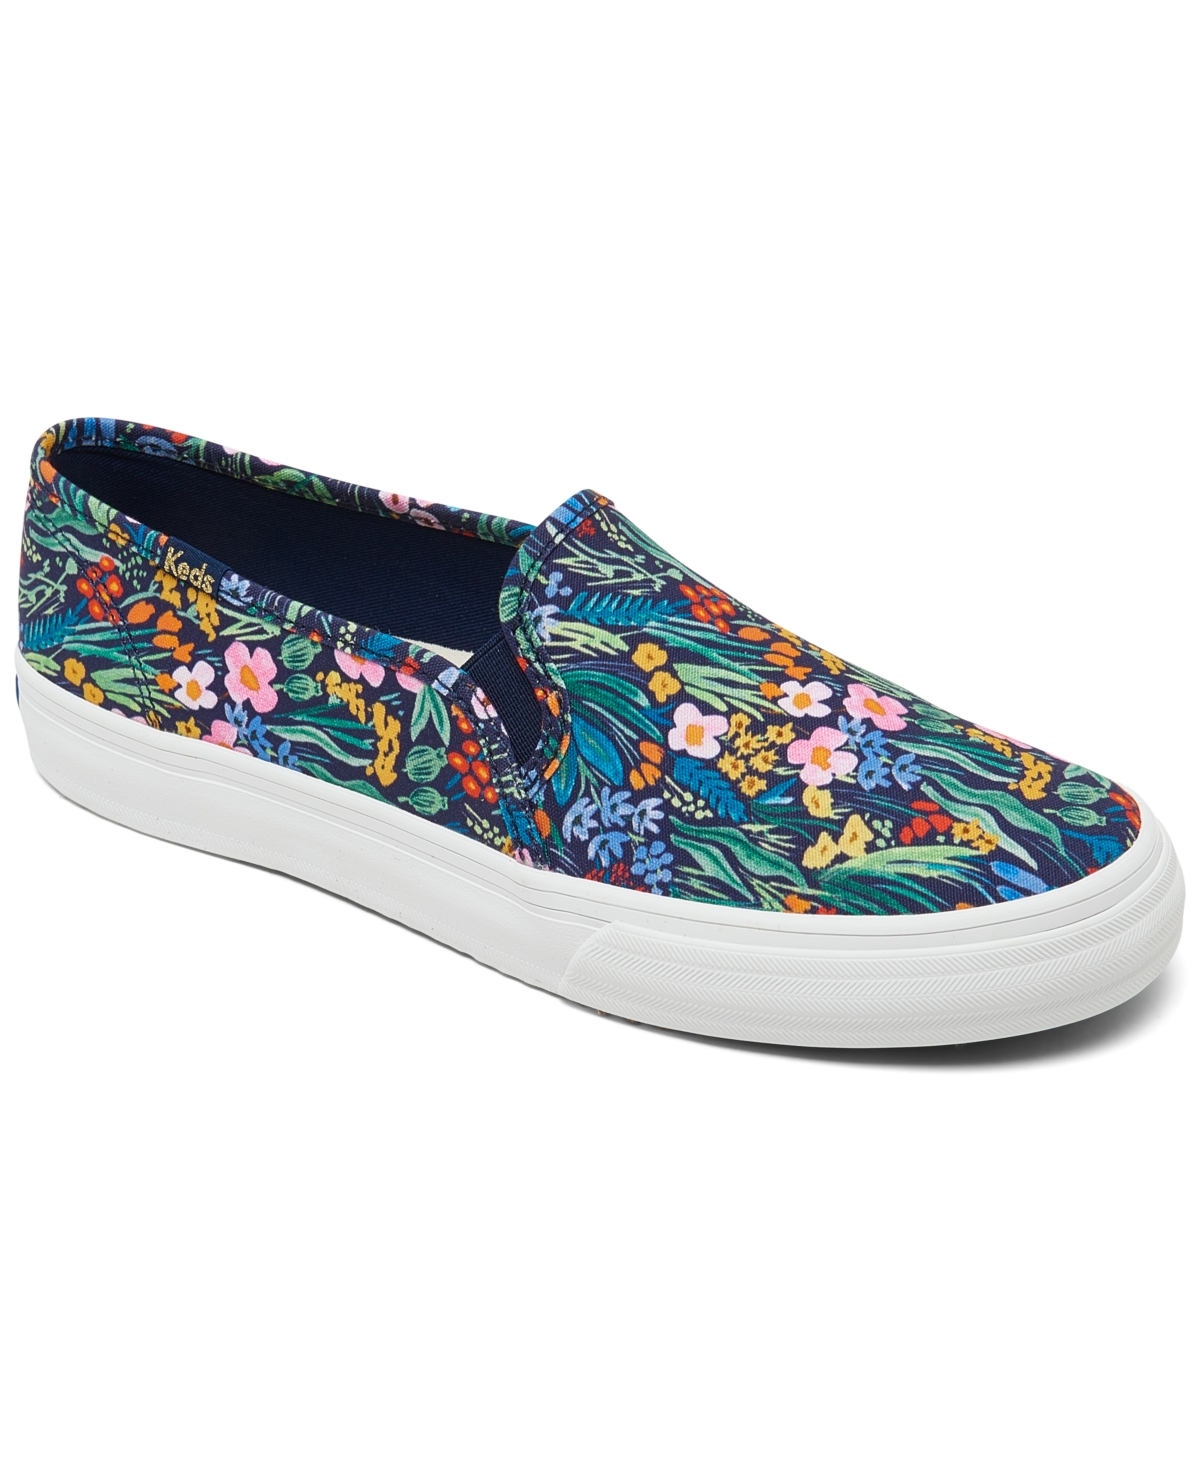 Keds Women's x Rifle Paper Co. Double Decker Garden Party Canvas Slip-On Casual Sneakers from Finish Line